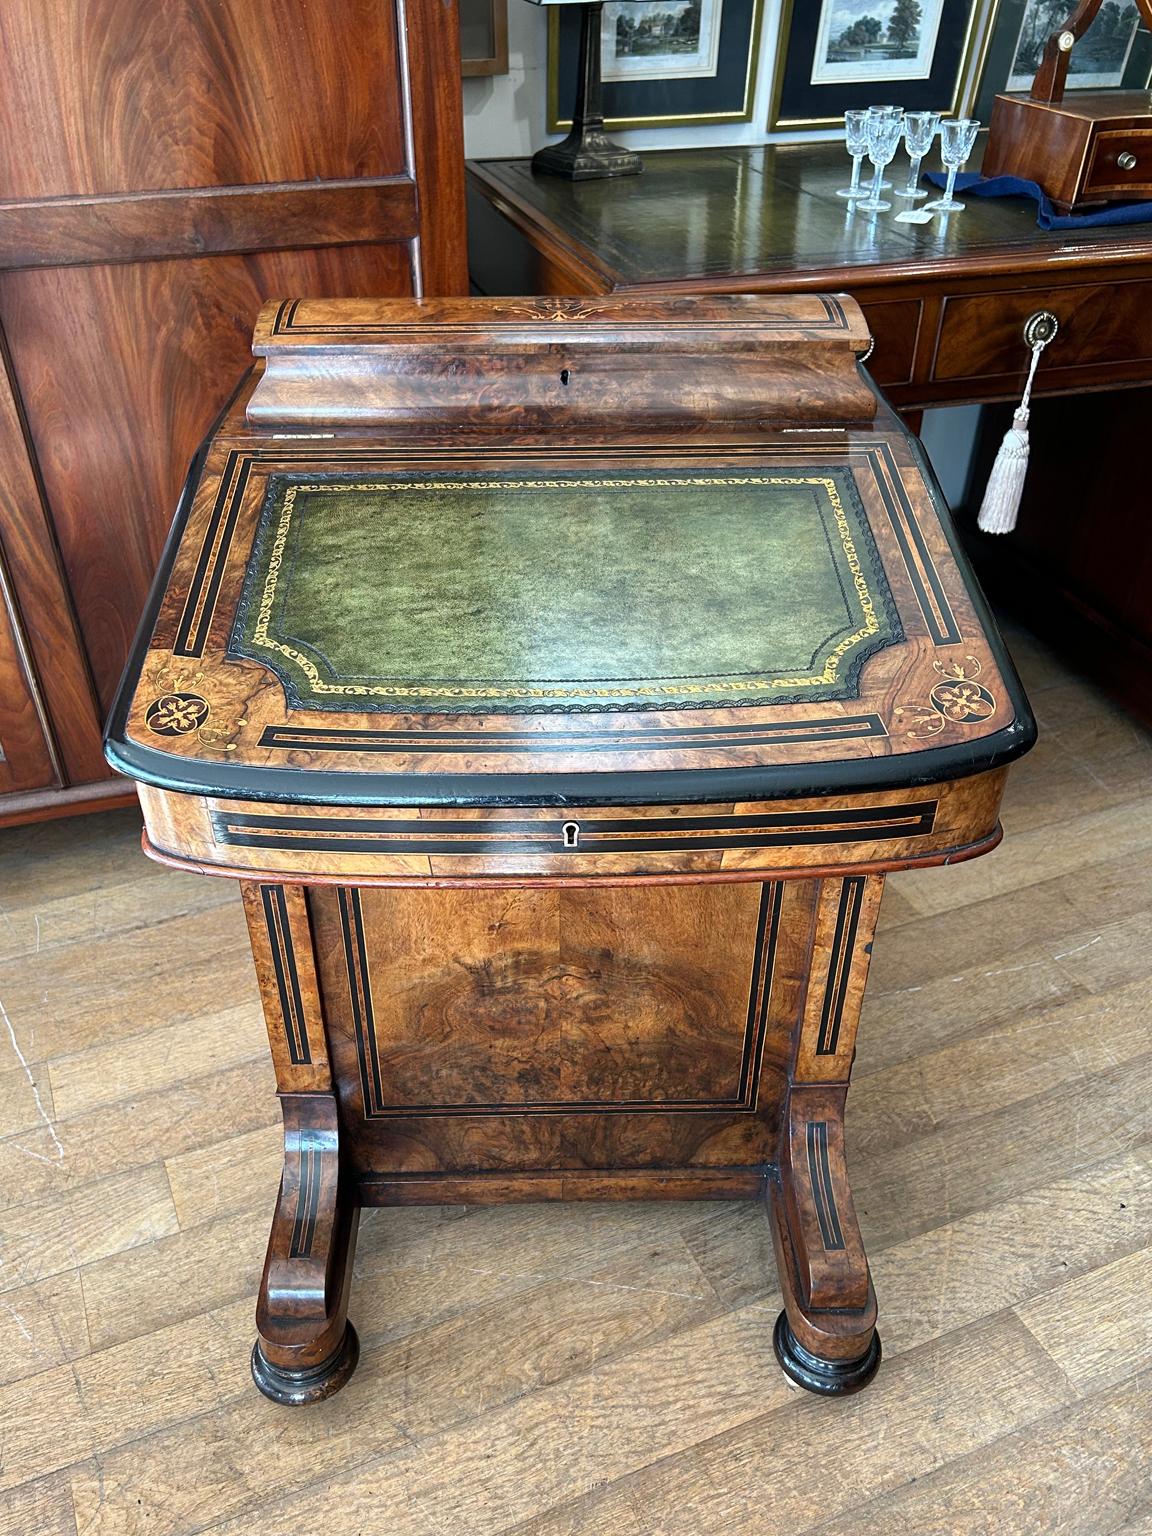 A high quality 19th century Victorian Burr Walnut Inlaid Davenport on a sloping green leather writing surface, Satinwood interior inside with two drawers and original letter racks and a pen tray compartments inside the lift up top. The right hand